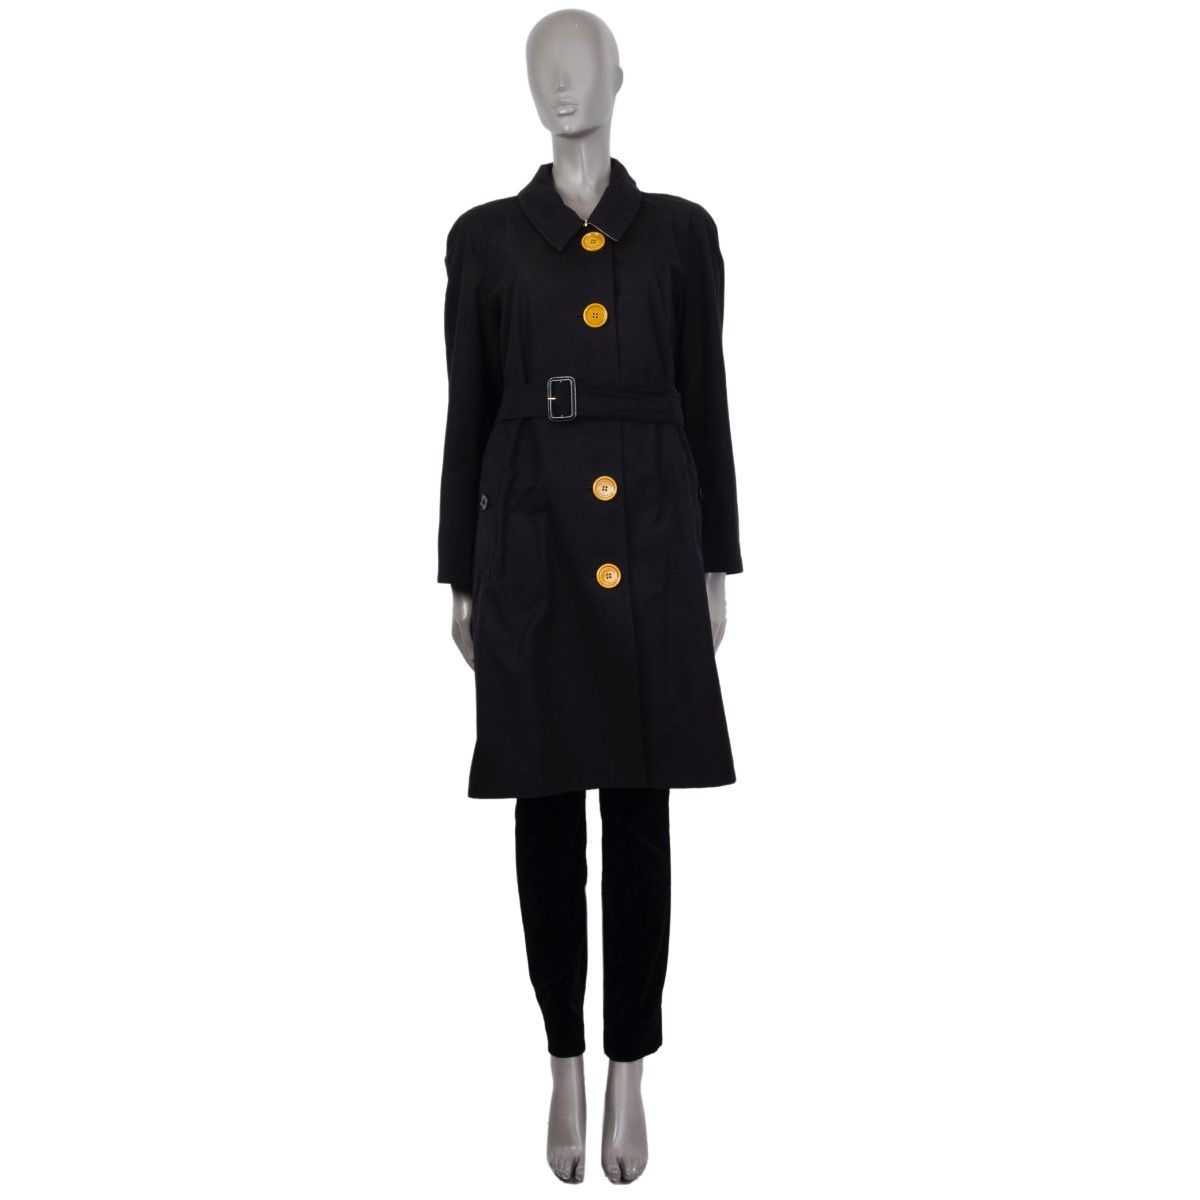 Burberry Single-Breasted Big-Buttoned Trench Coat Black Cotton Gabardine